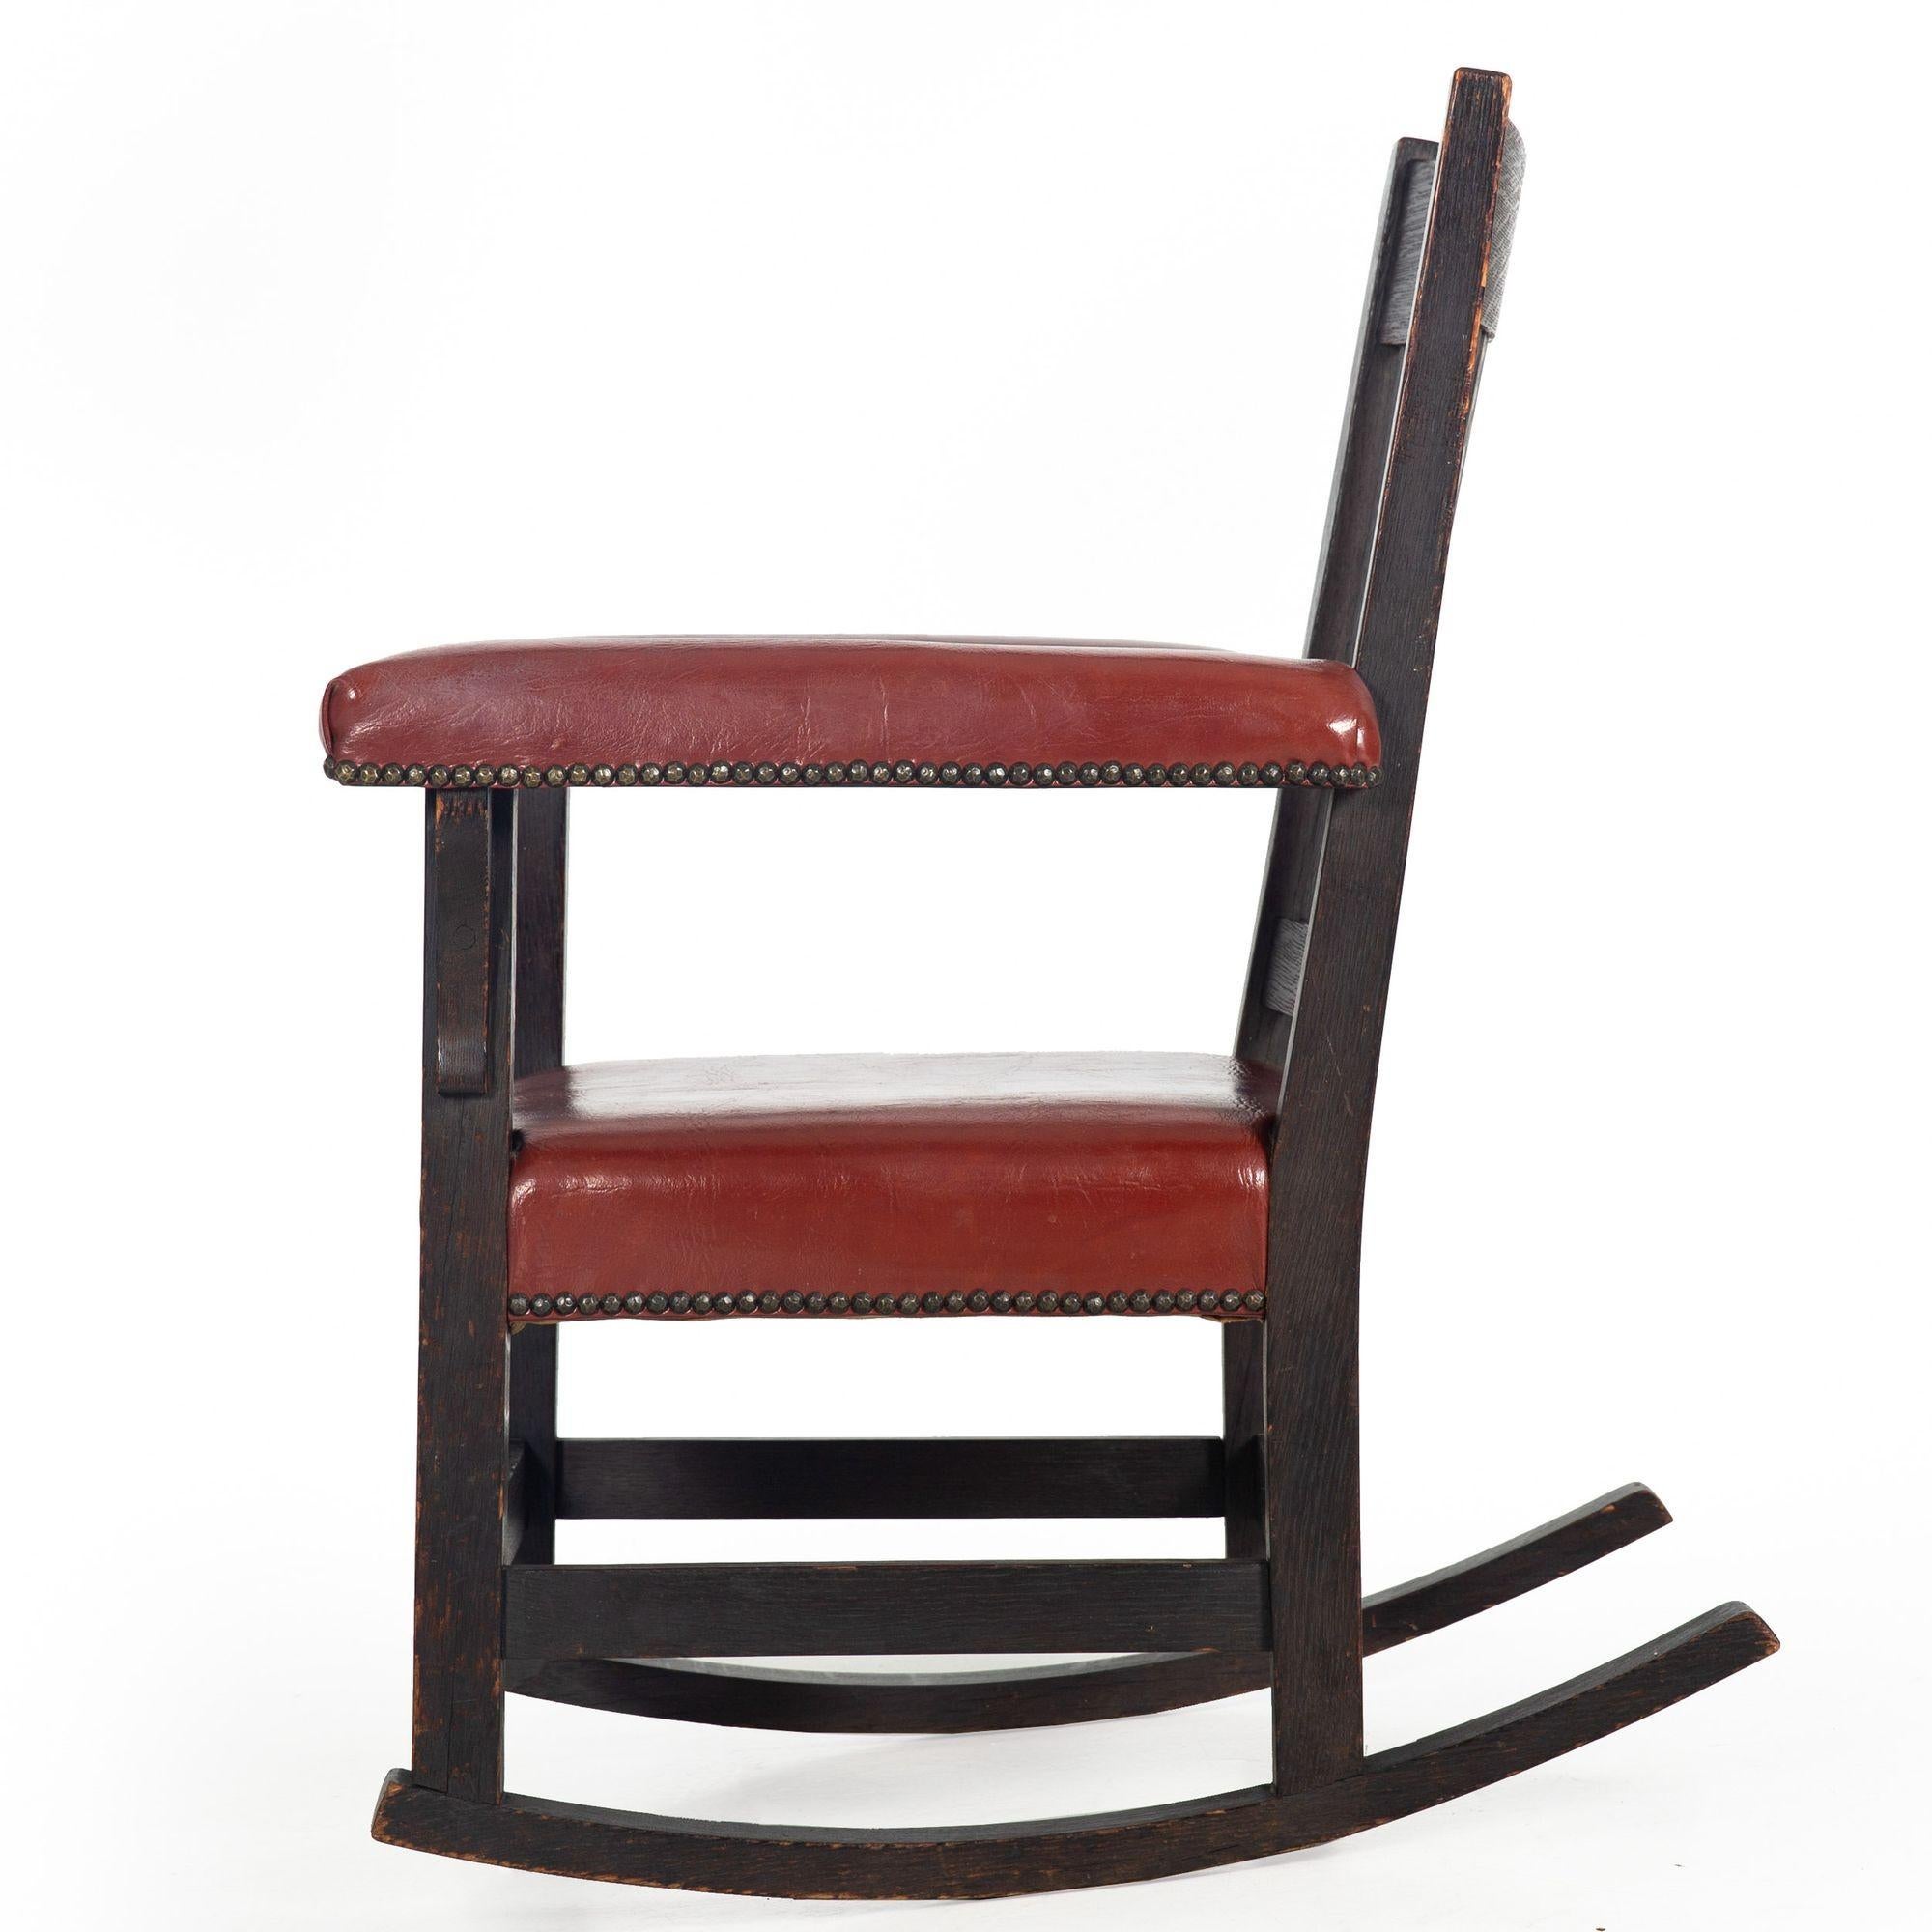 Ebonized Arts & Crafts Fumed Oak Rocking Chair by Gustave Stickley, no. 311 1/2 For Sale